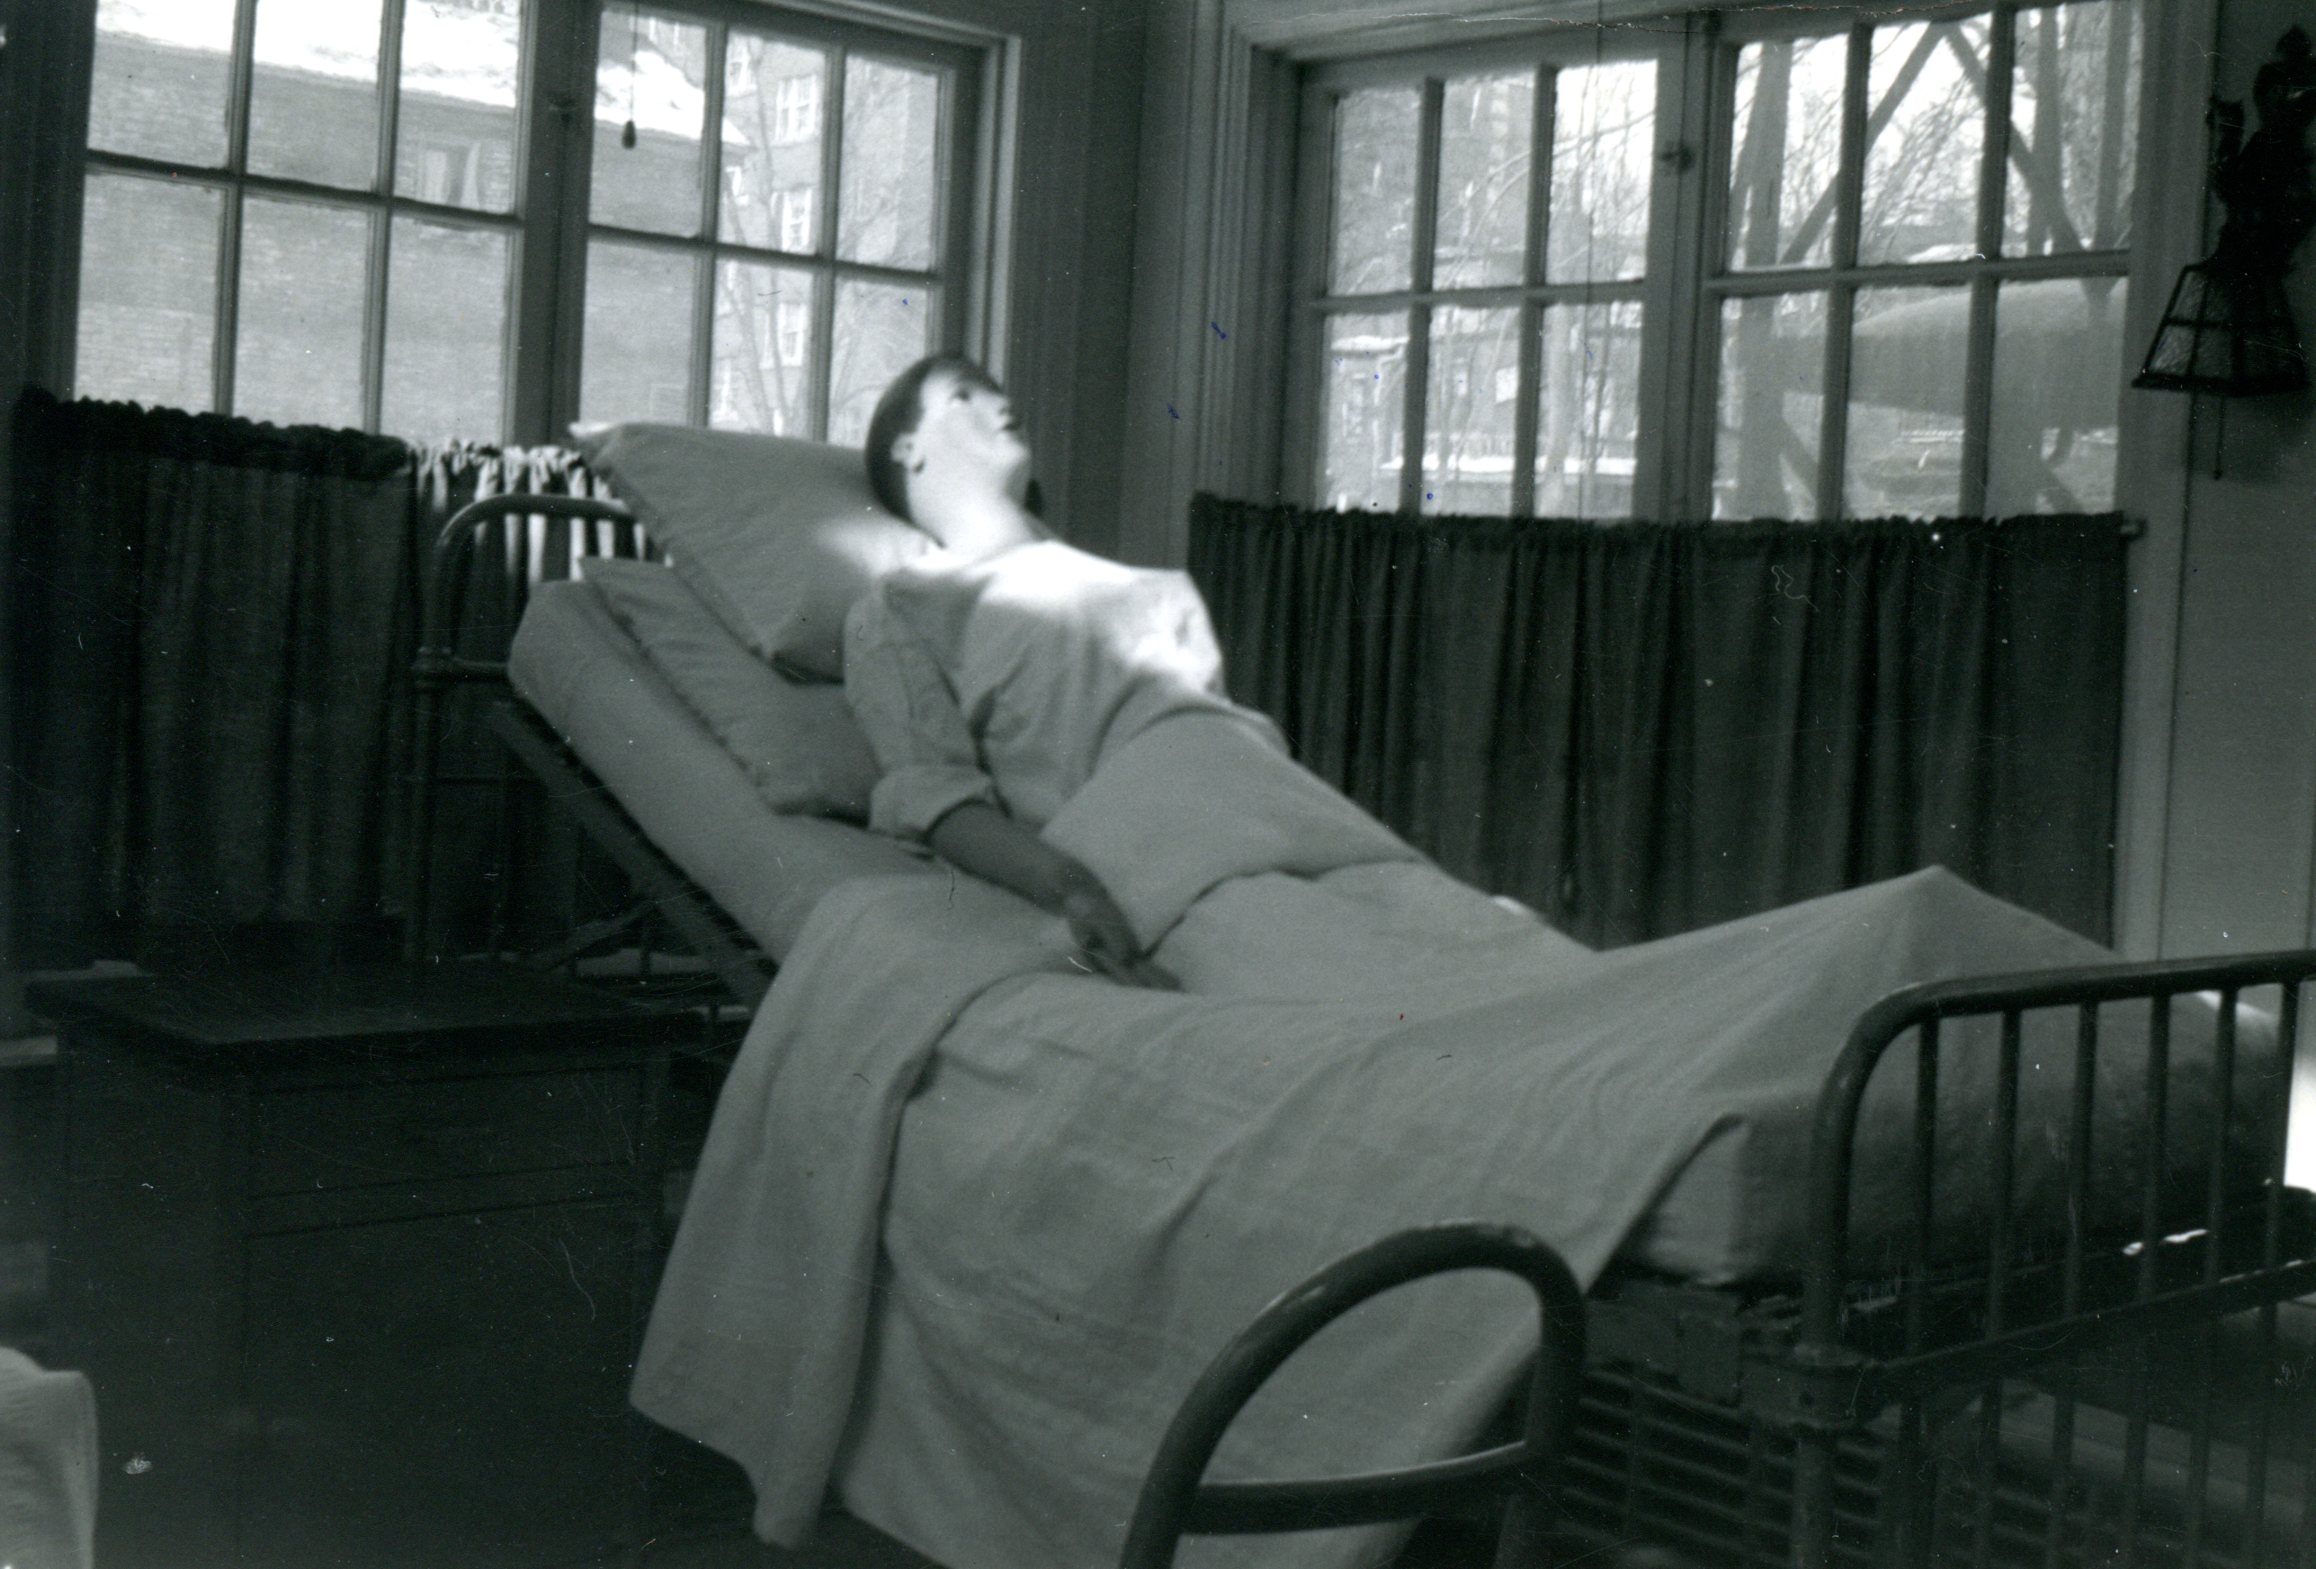 A mannequin lies in a hospital bed.